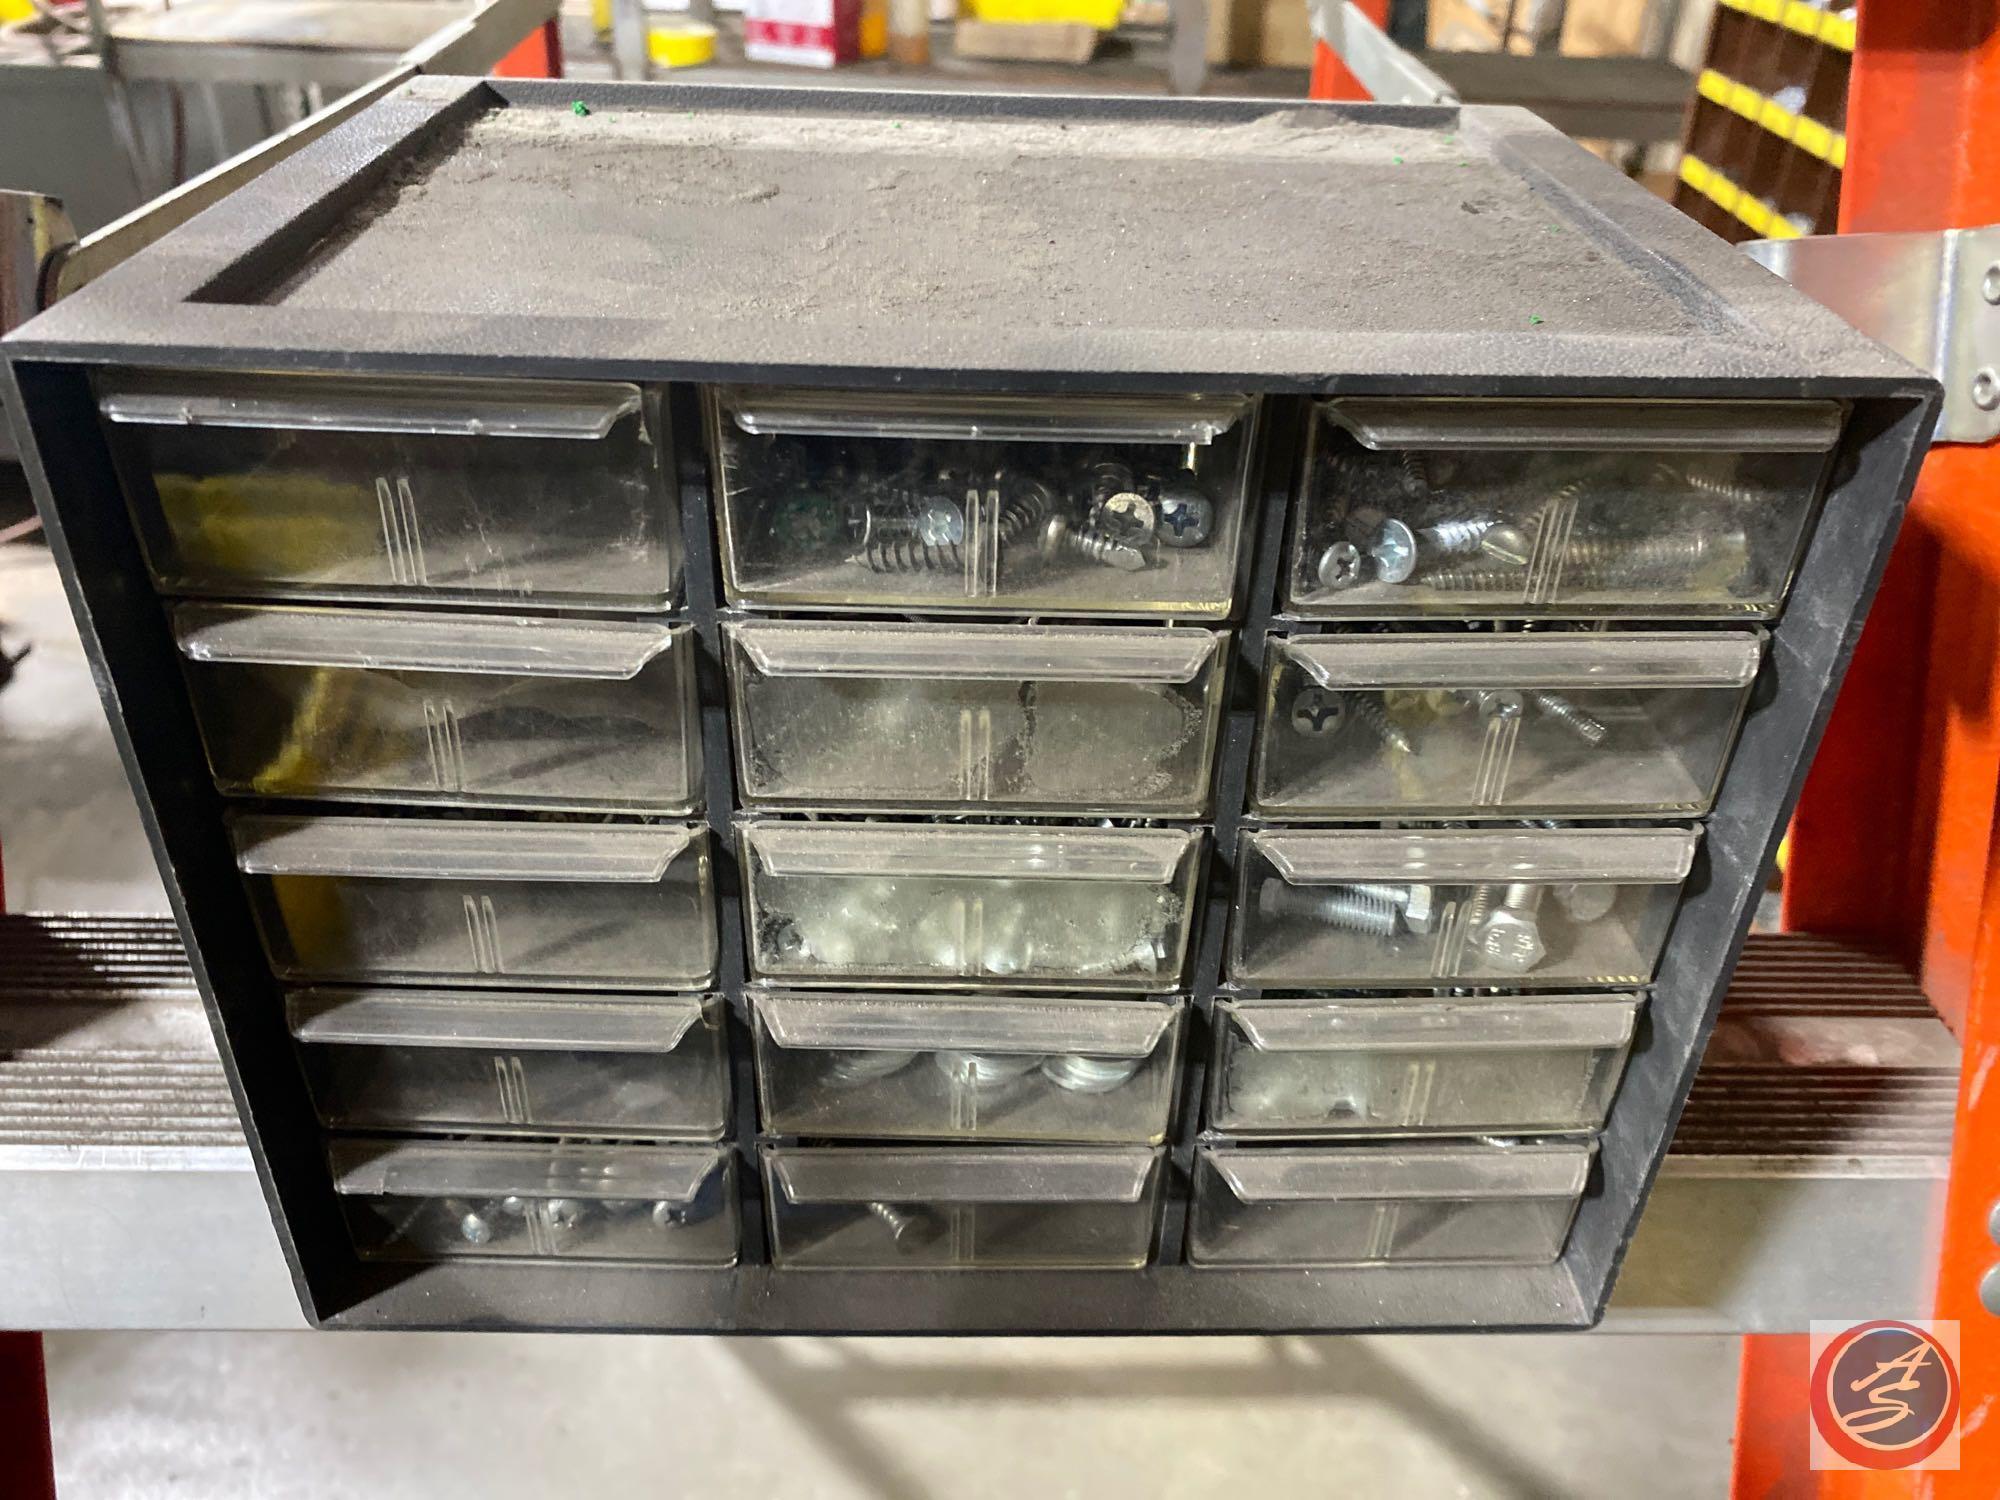 Sliding draawer organizer containing MIG welder tips, guides, gas diffusers, Socket Head Cap Screws